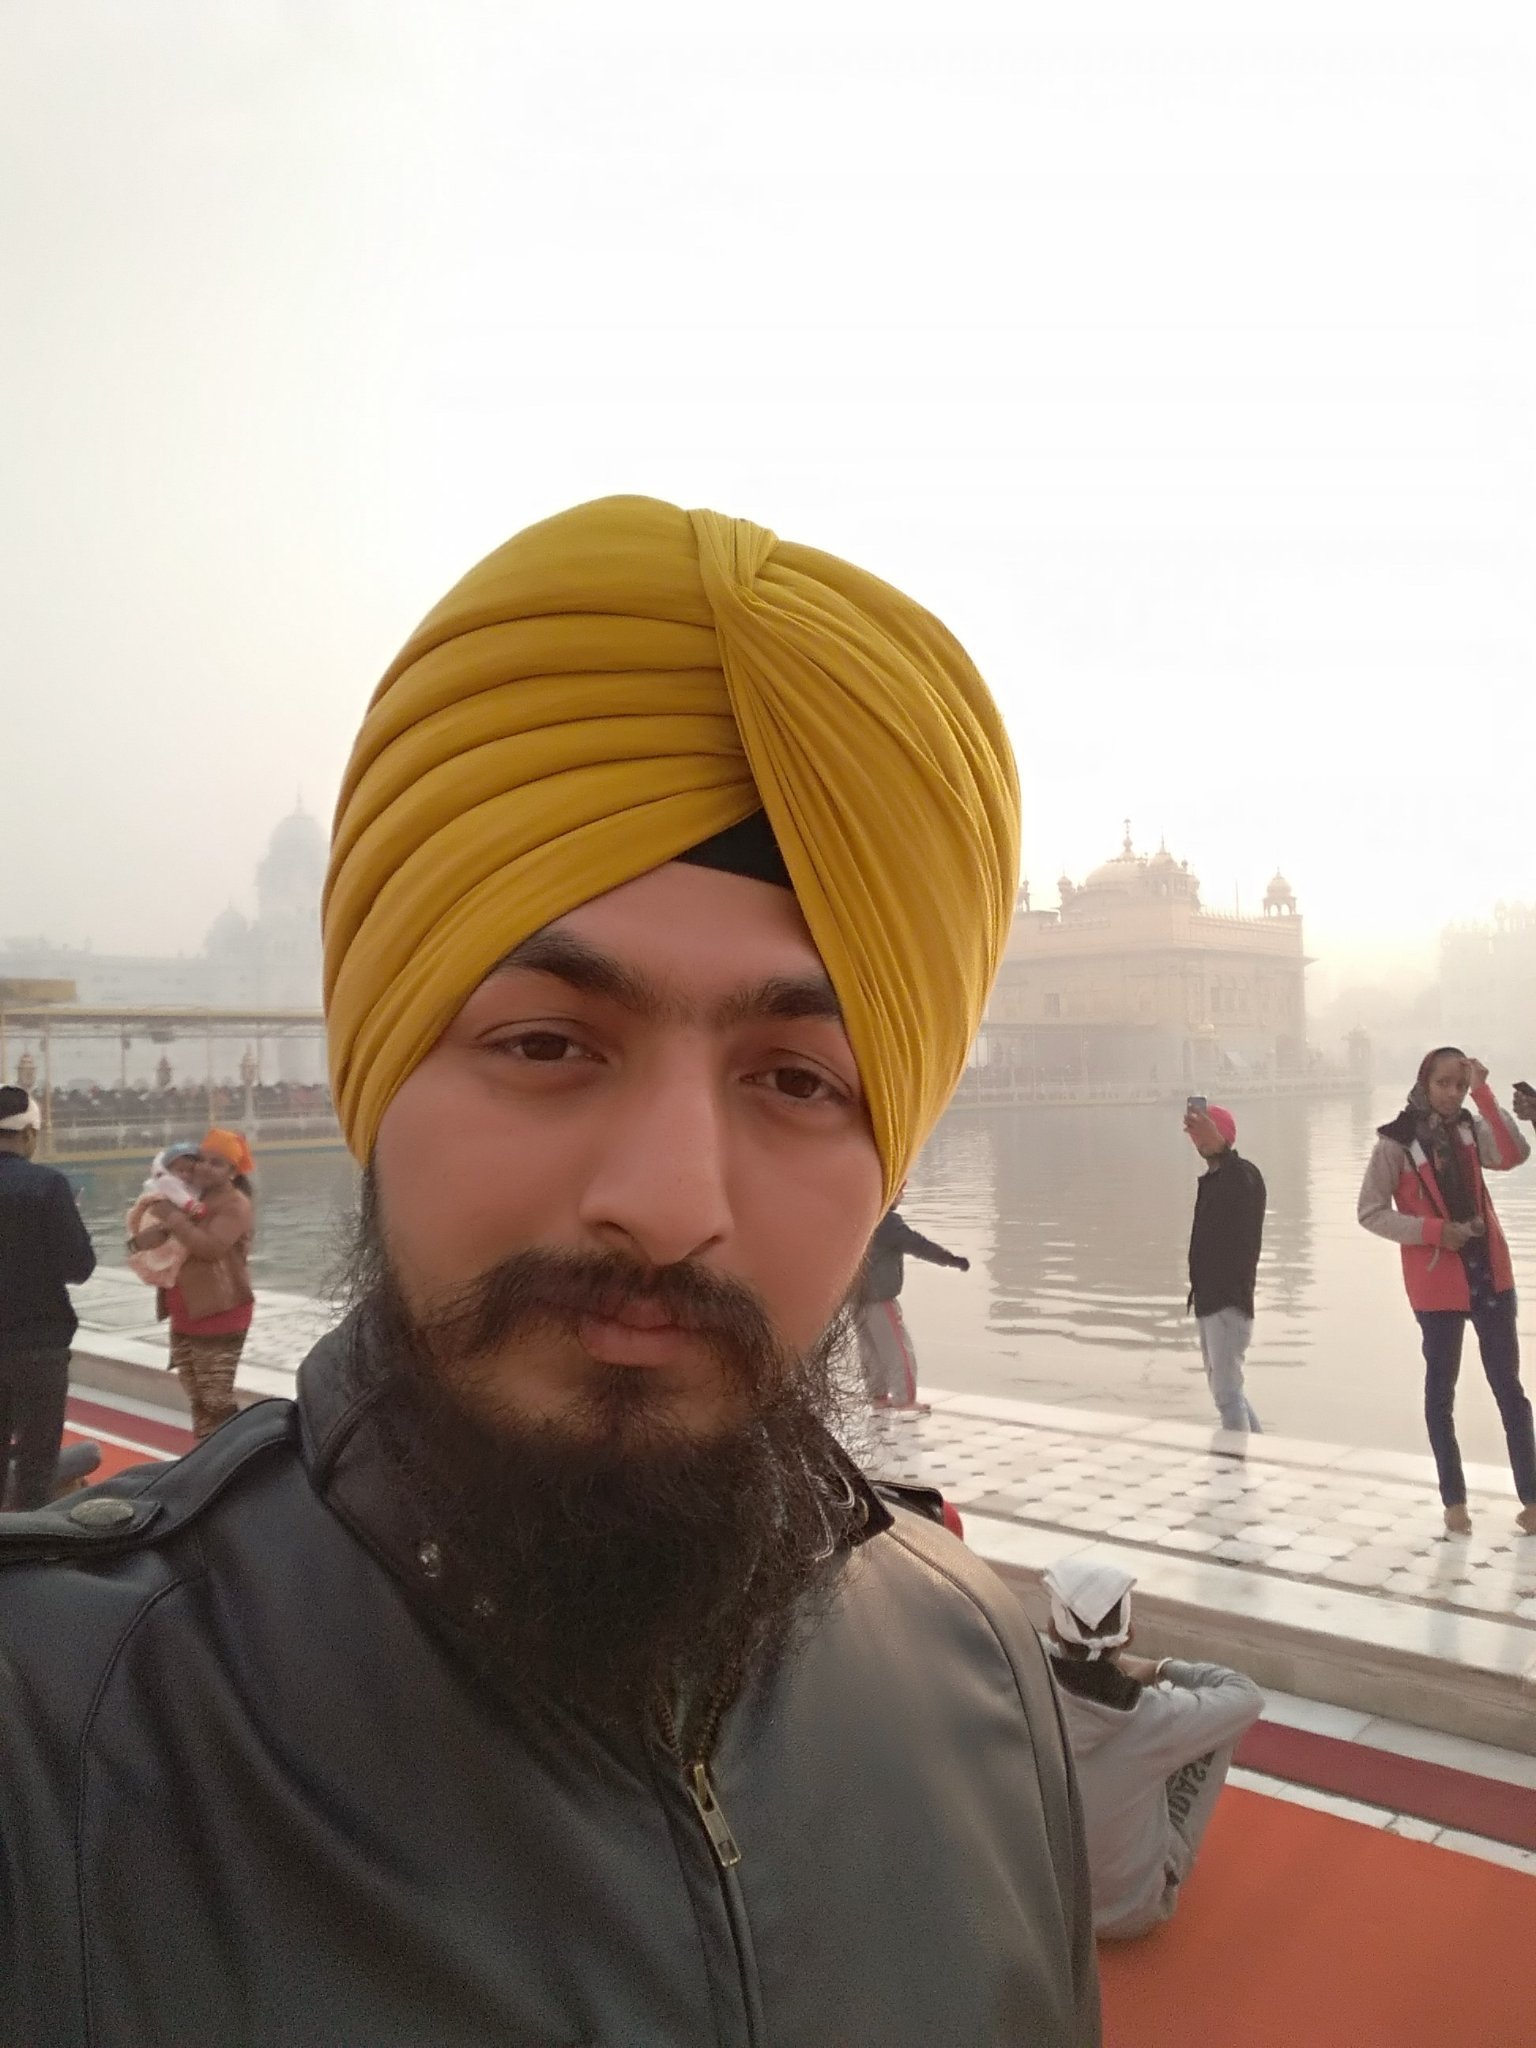 I'm being a Sikh = Learner & Listener for whole life 
Working as a Data Analytics & Processing Expert
#SoftwareDeveloper #Sikh #Practising
Prabh Milne Ka Chao